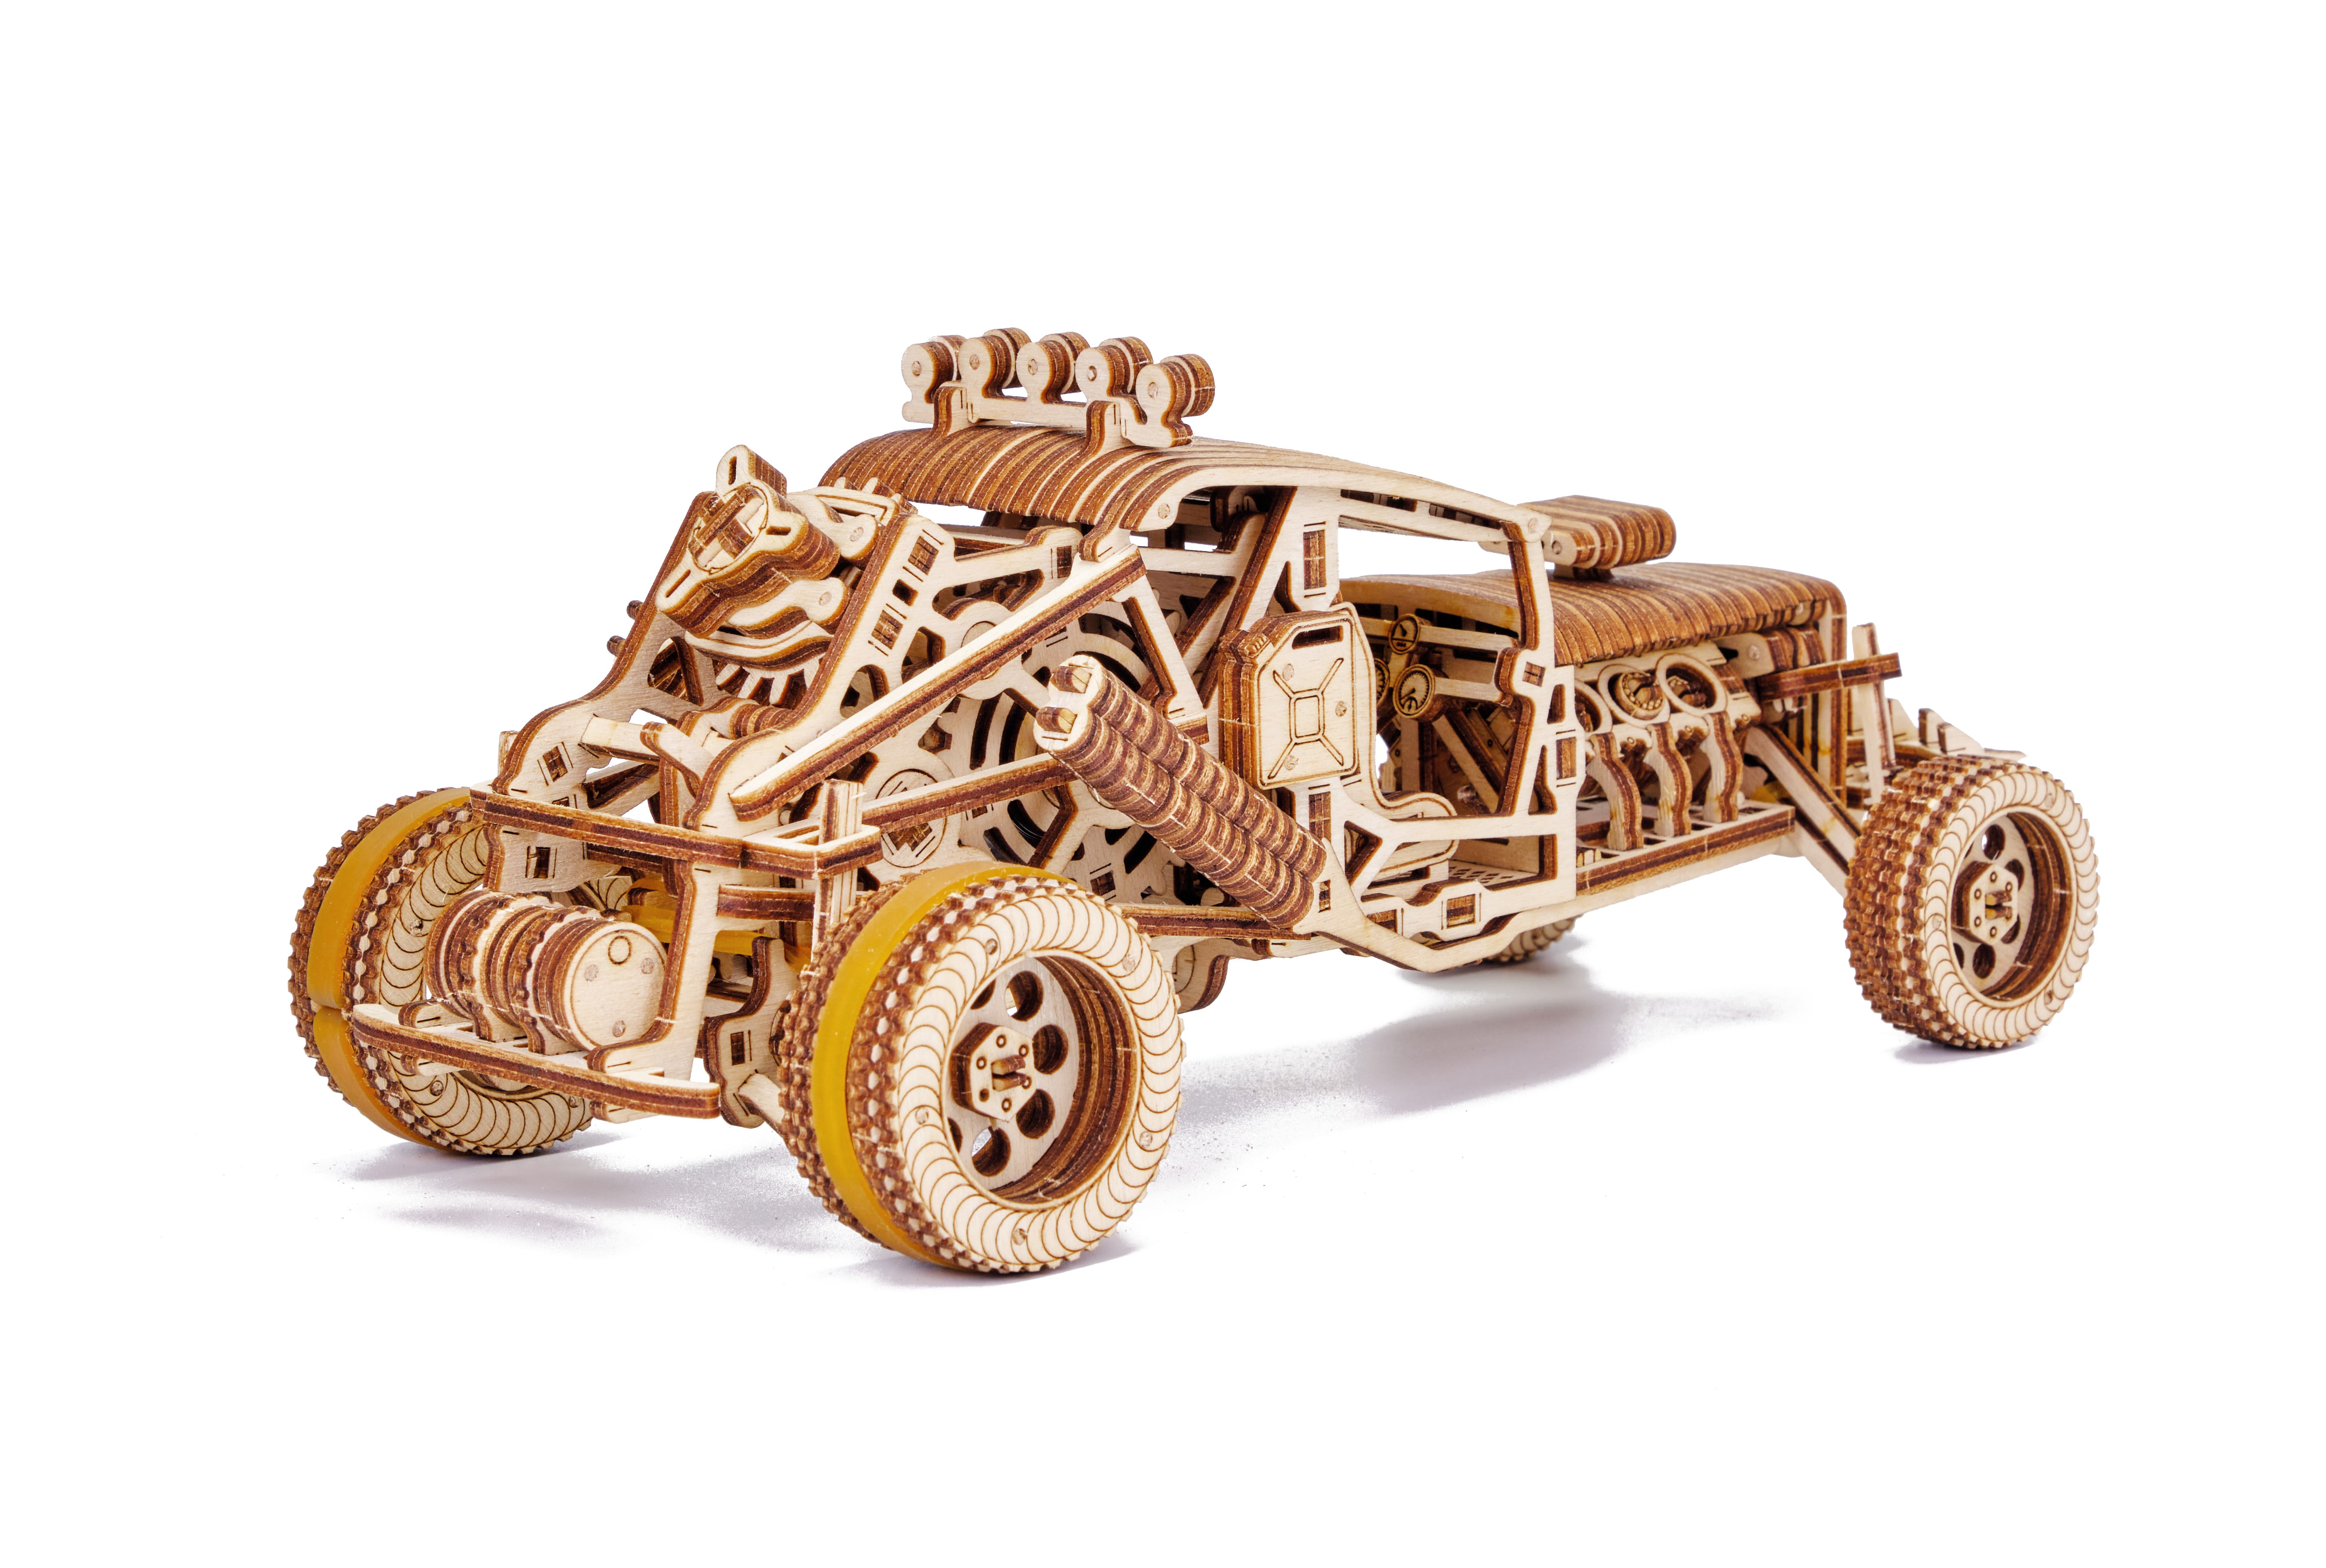 Wood Trick Mad Buggy 322 Piece Set